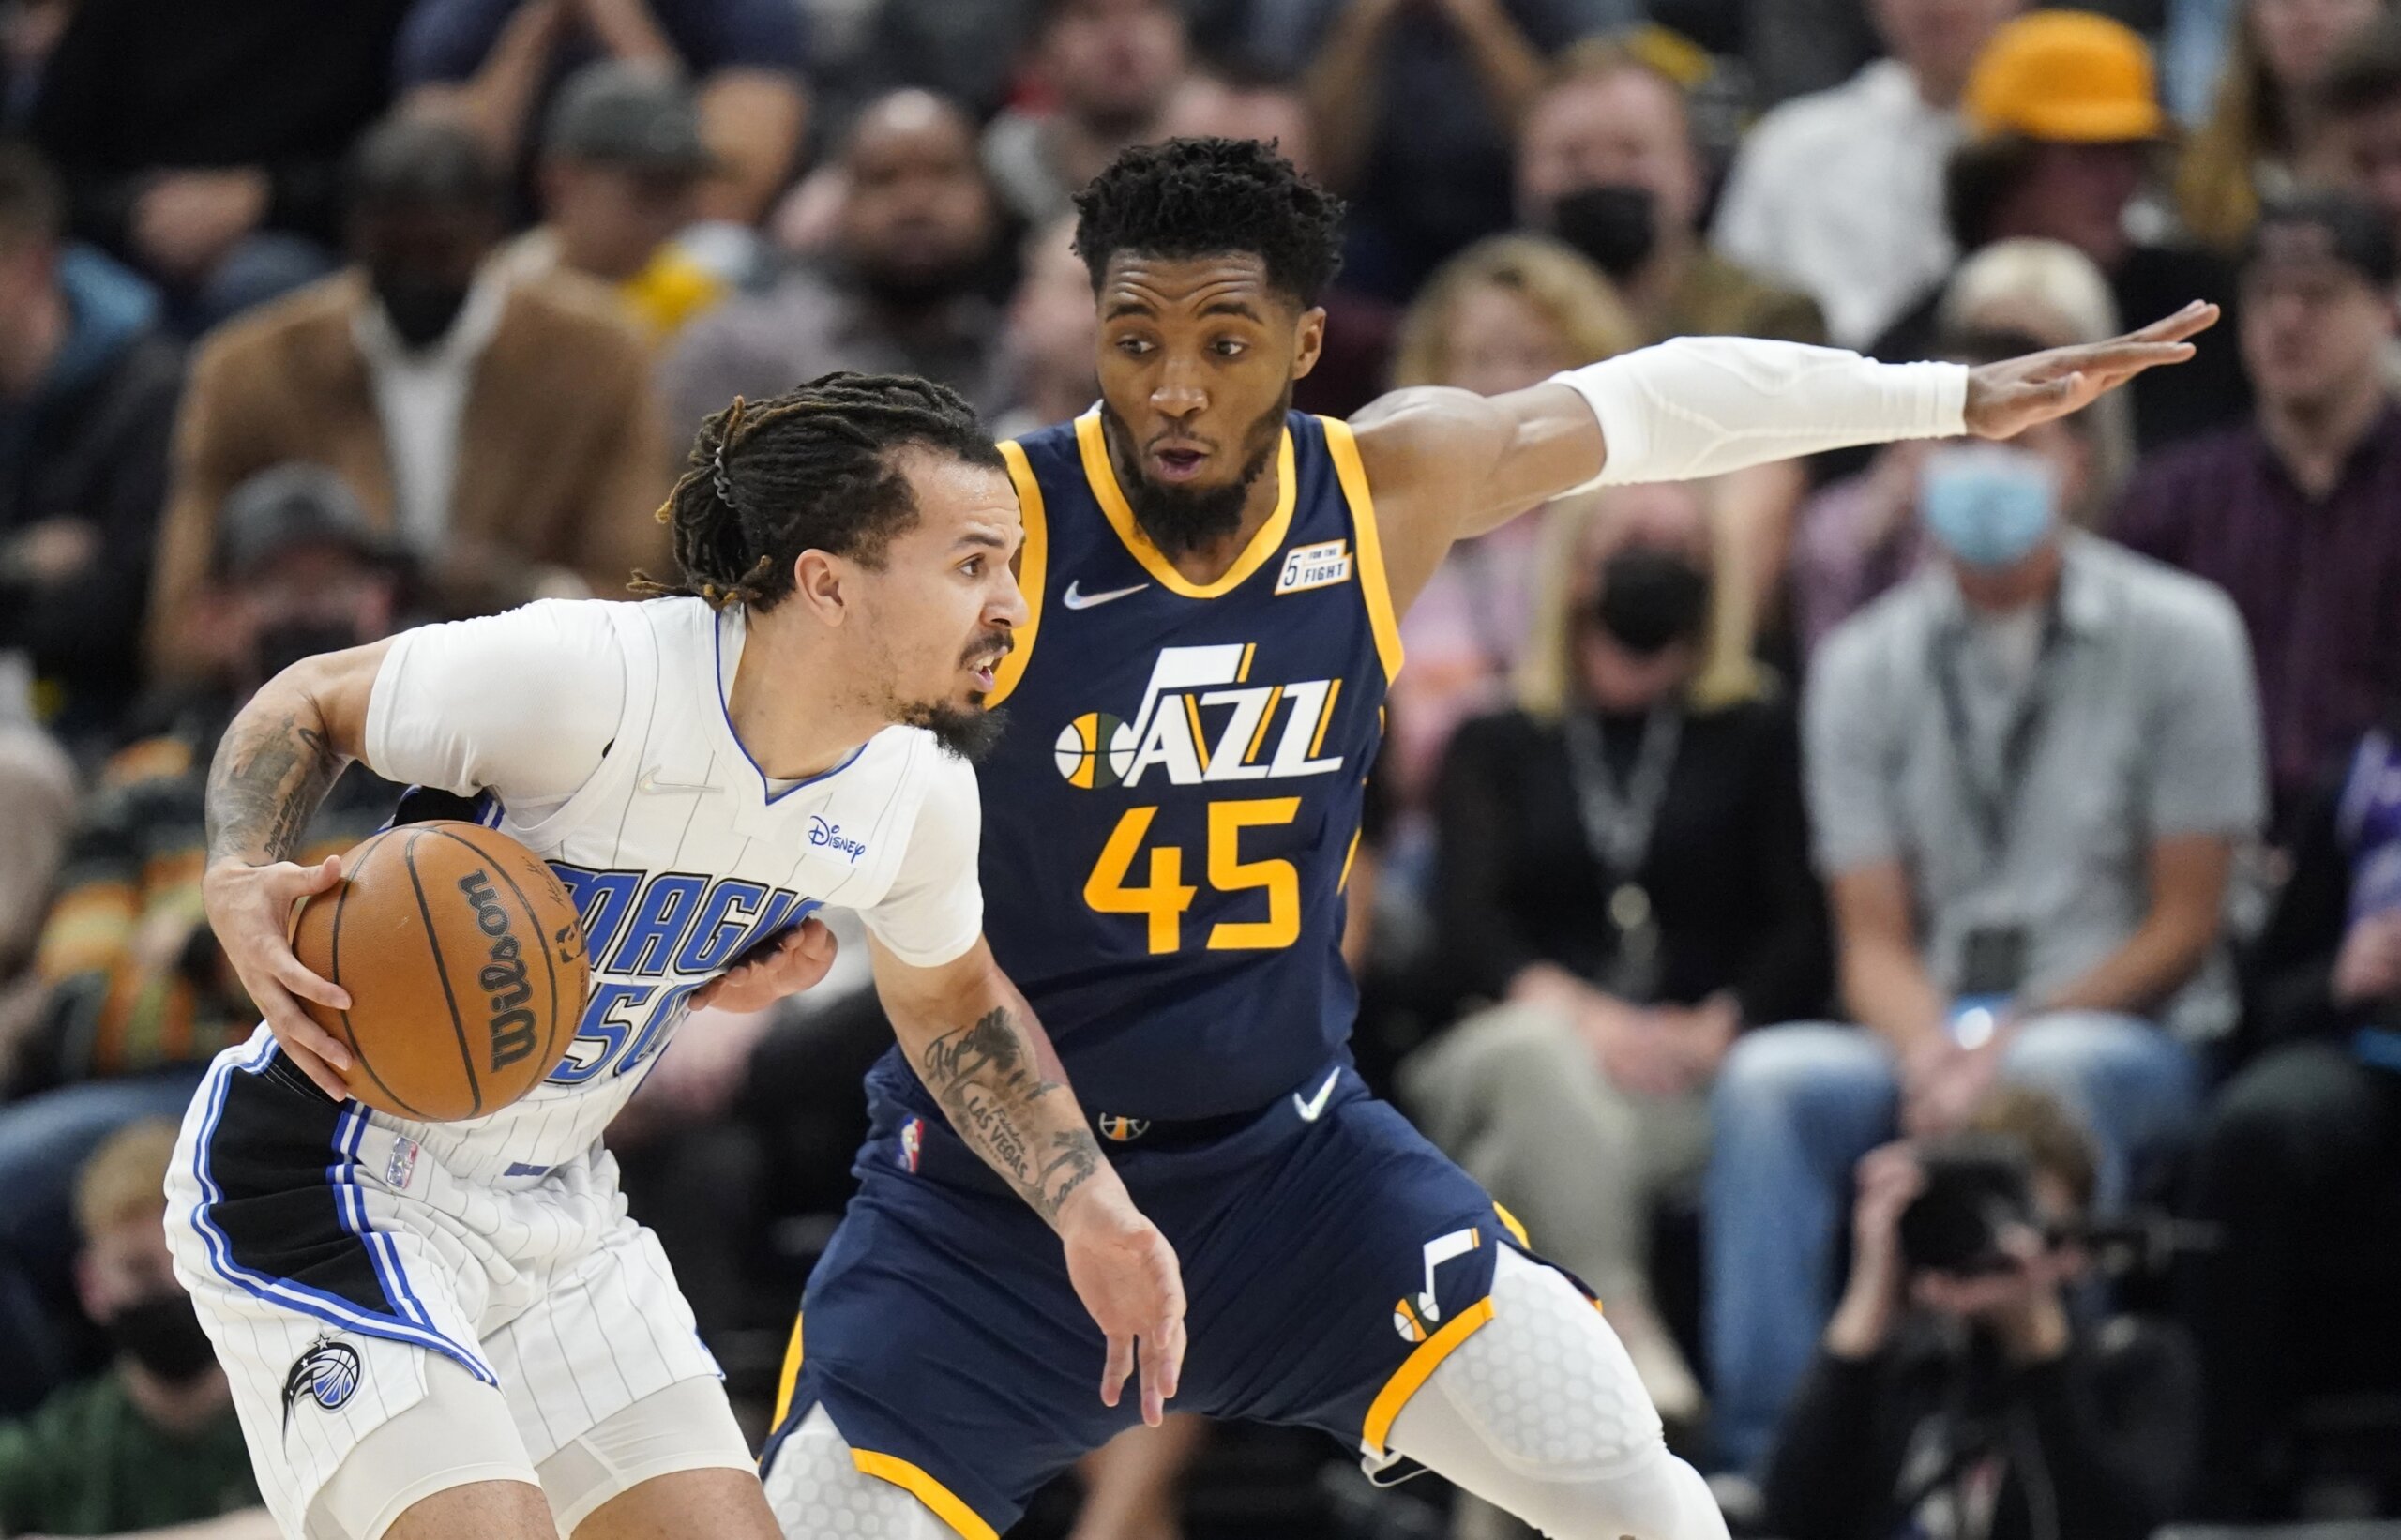 Jazz win fifth straight at home, top Magic 114-99 - WTOP News